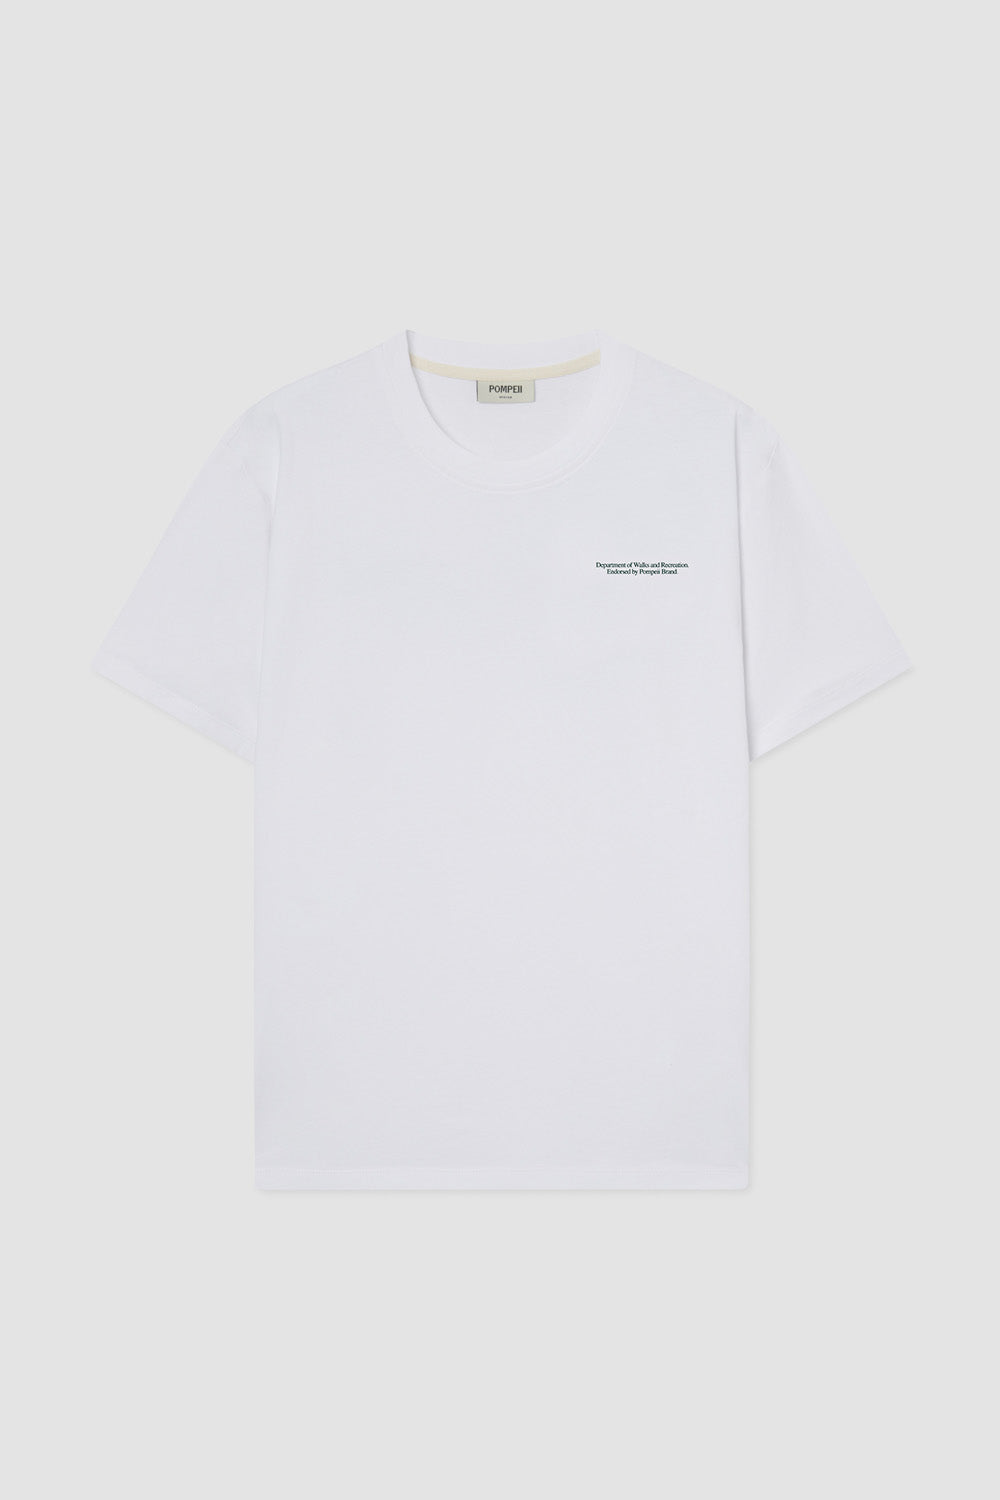 LEISURE SERVICES GRAPHIC TEE